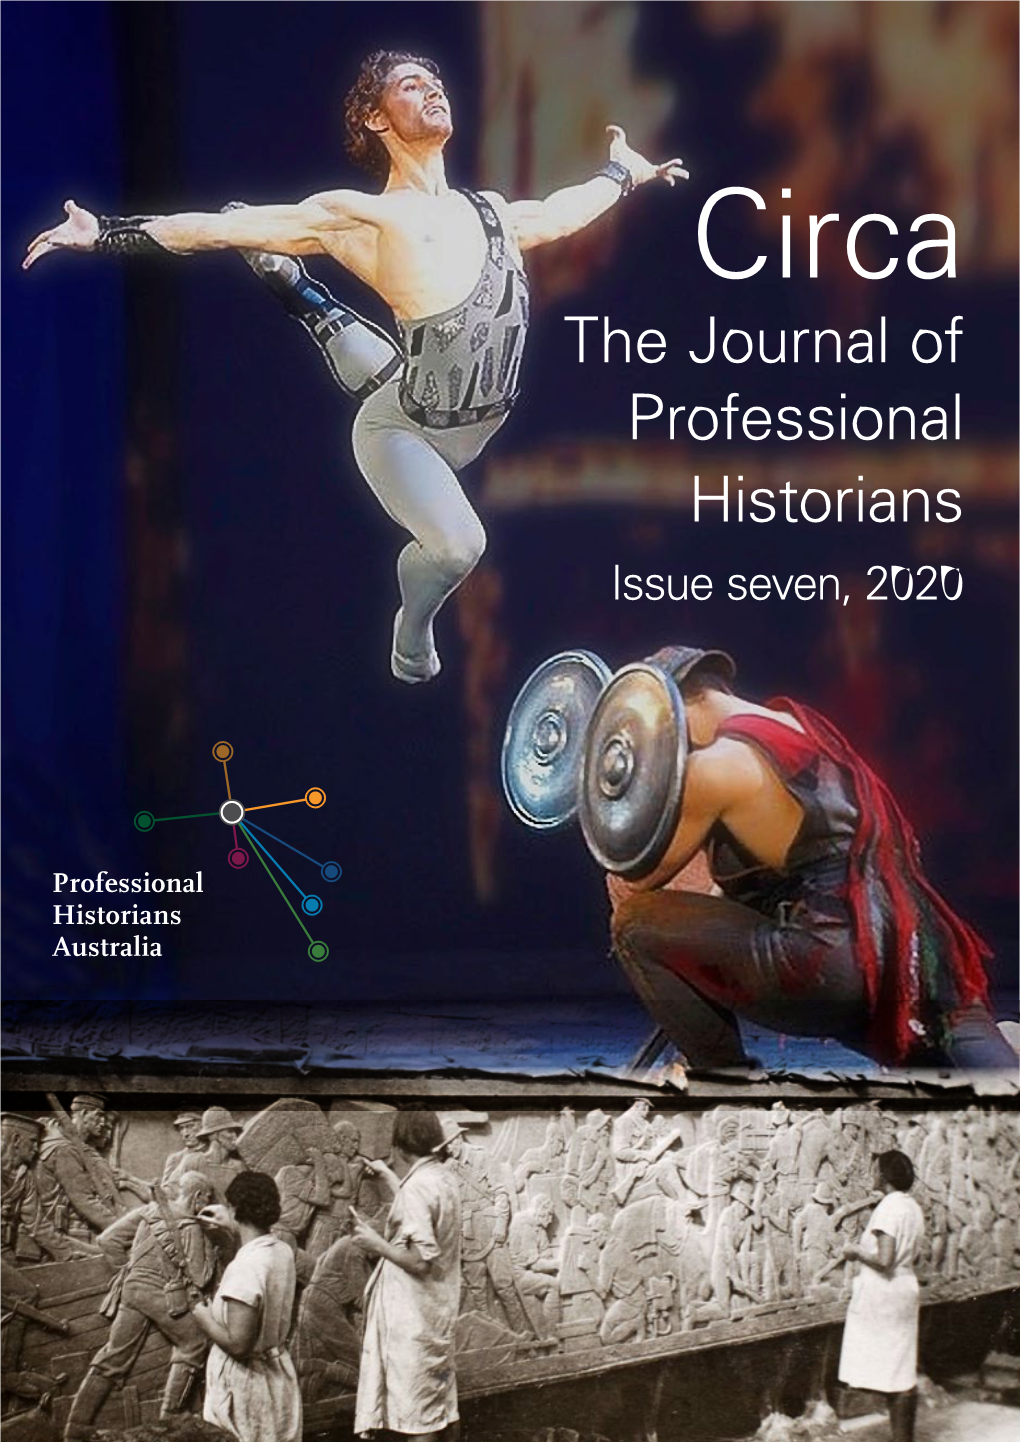 The Journal of Professional Historians Issue Seven, 2020 Circa: the Journal of Professional Historians Issue Seven, 2020 Professional Historians Australia